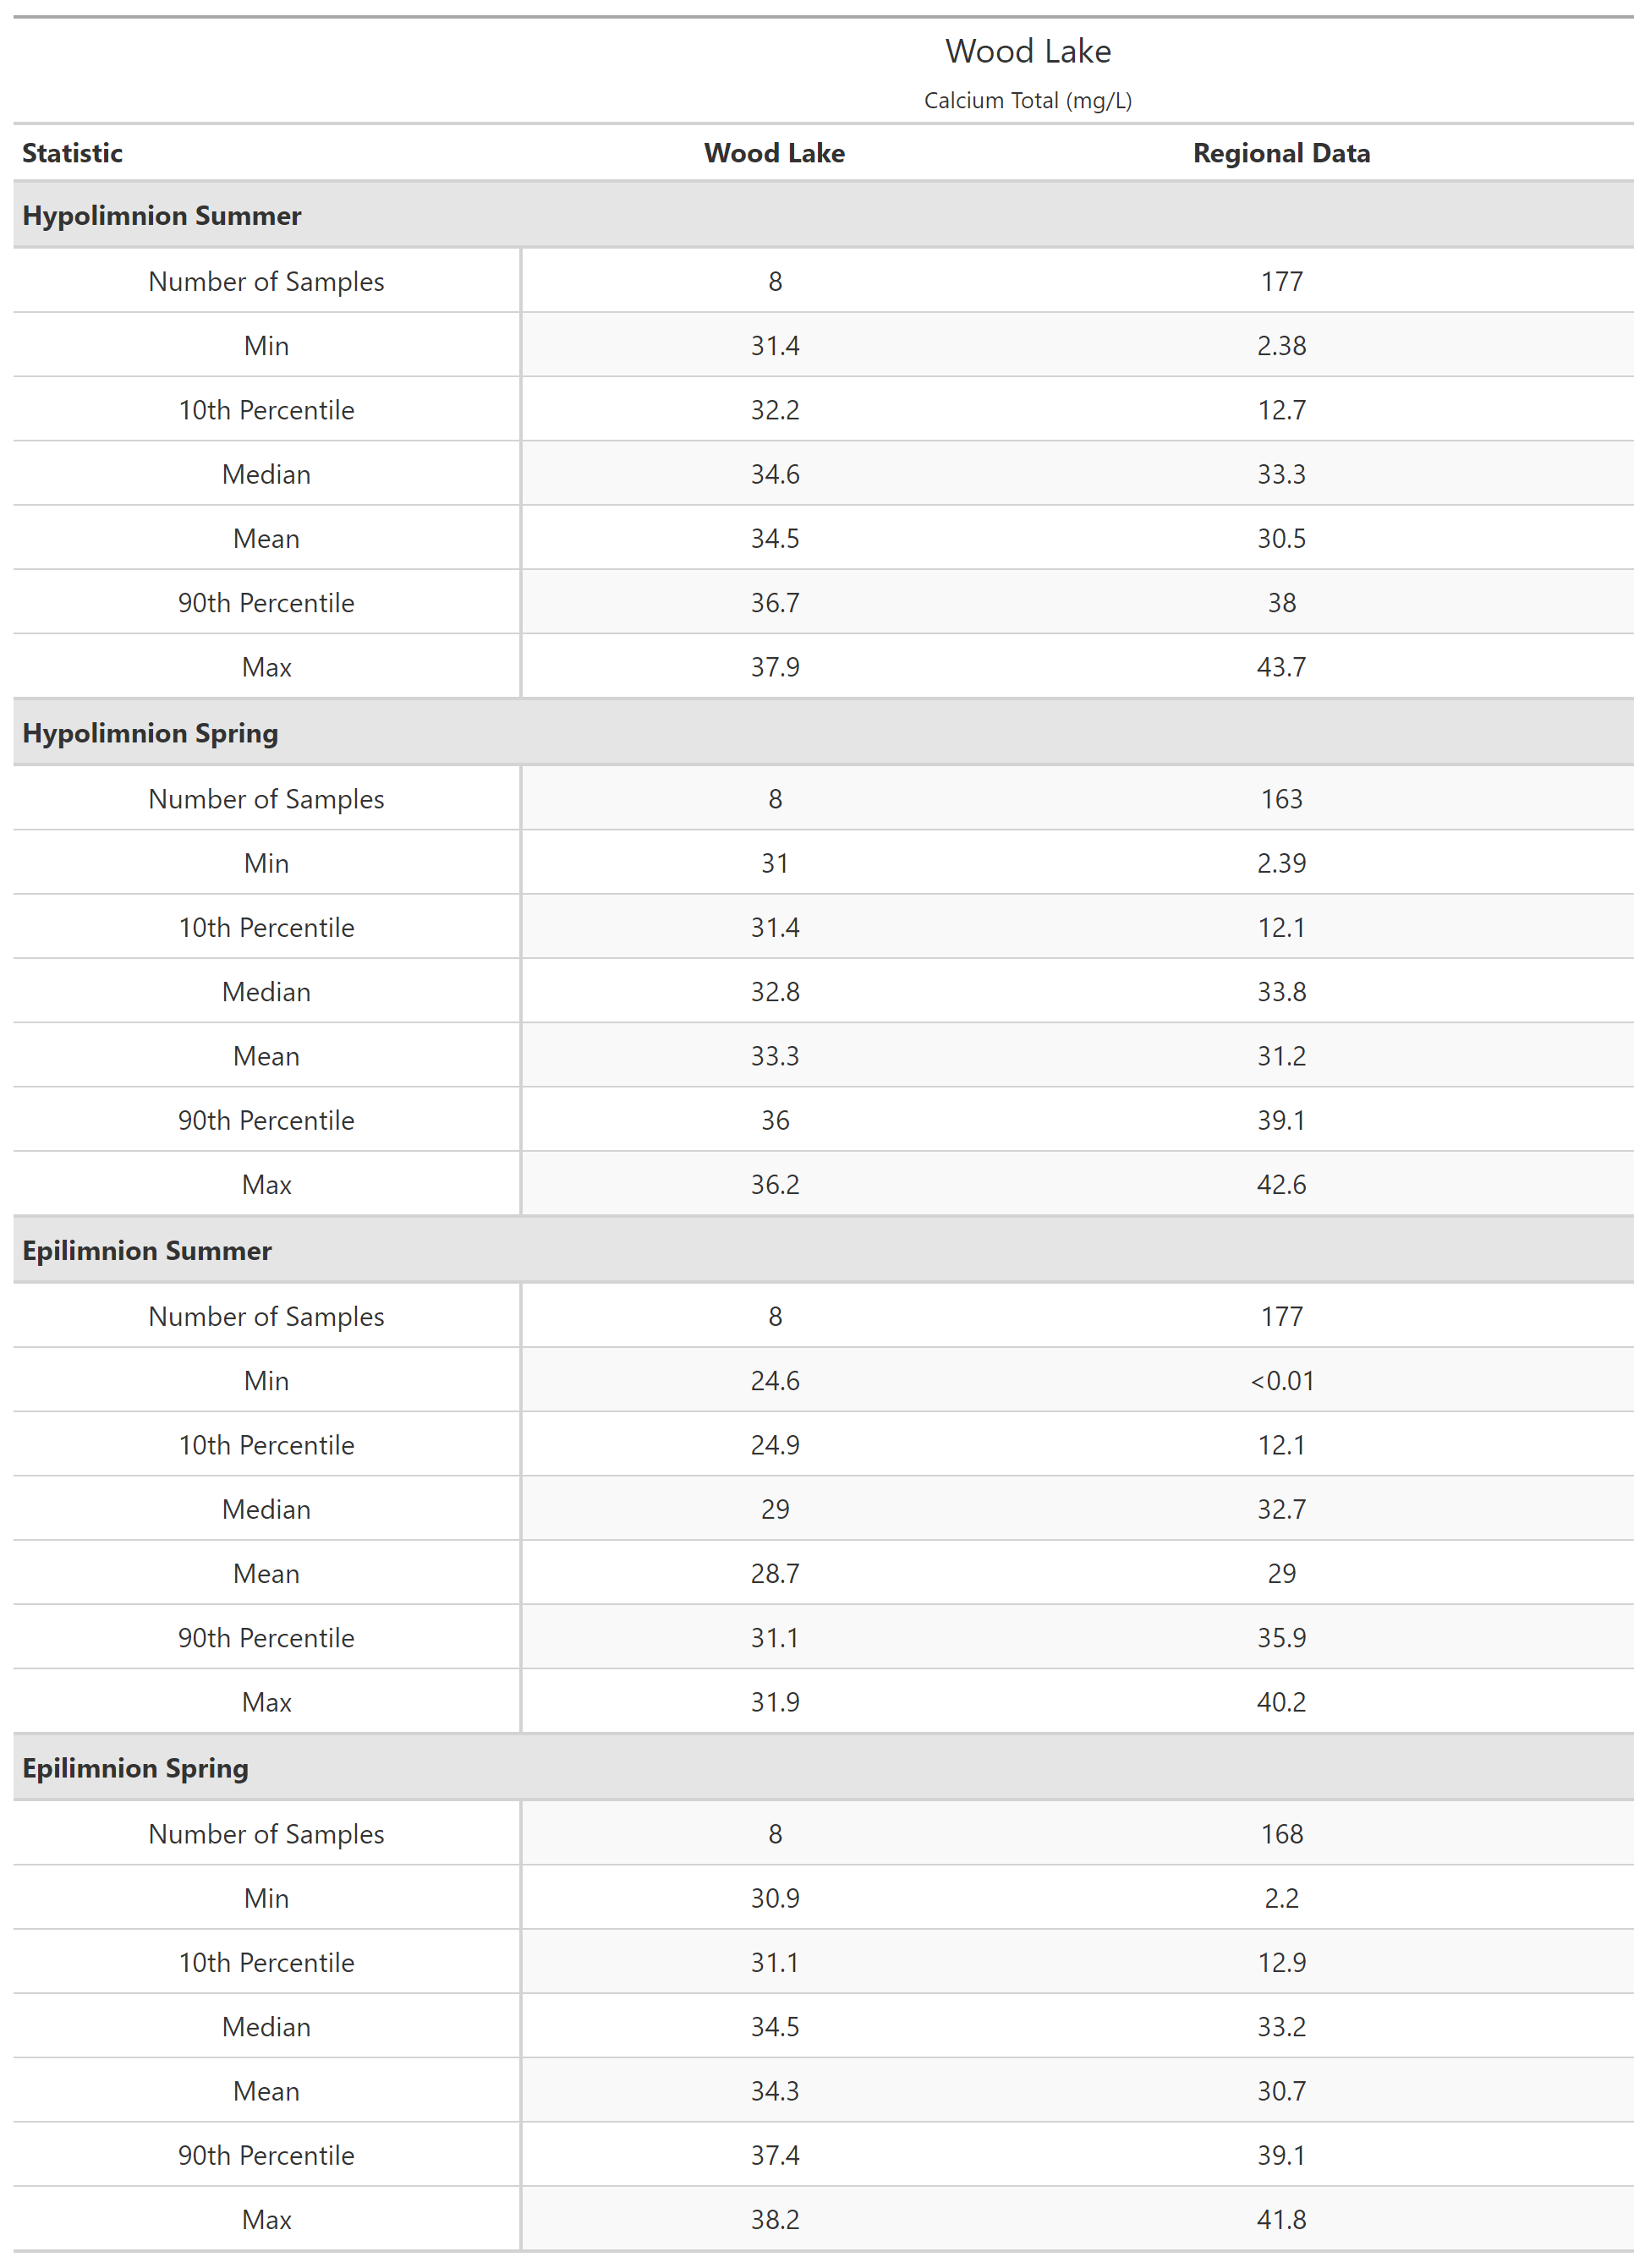 A table of summary statistics for Calcium Total with comparison to regional data